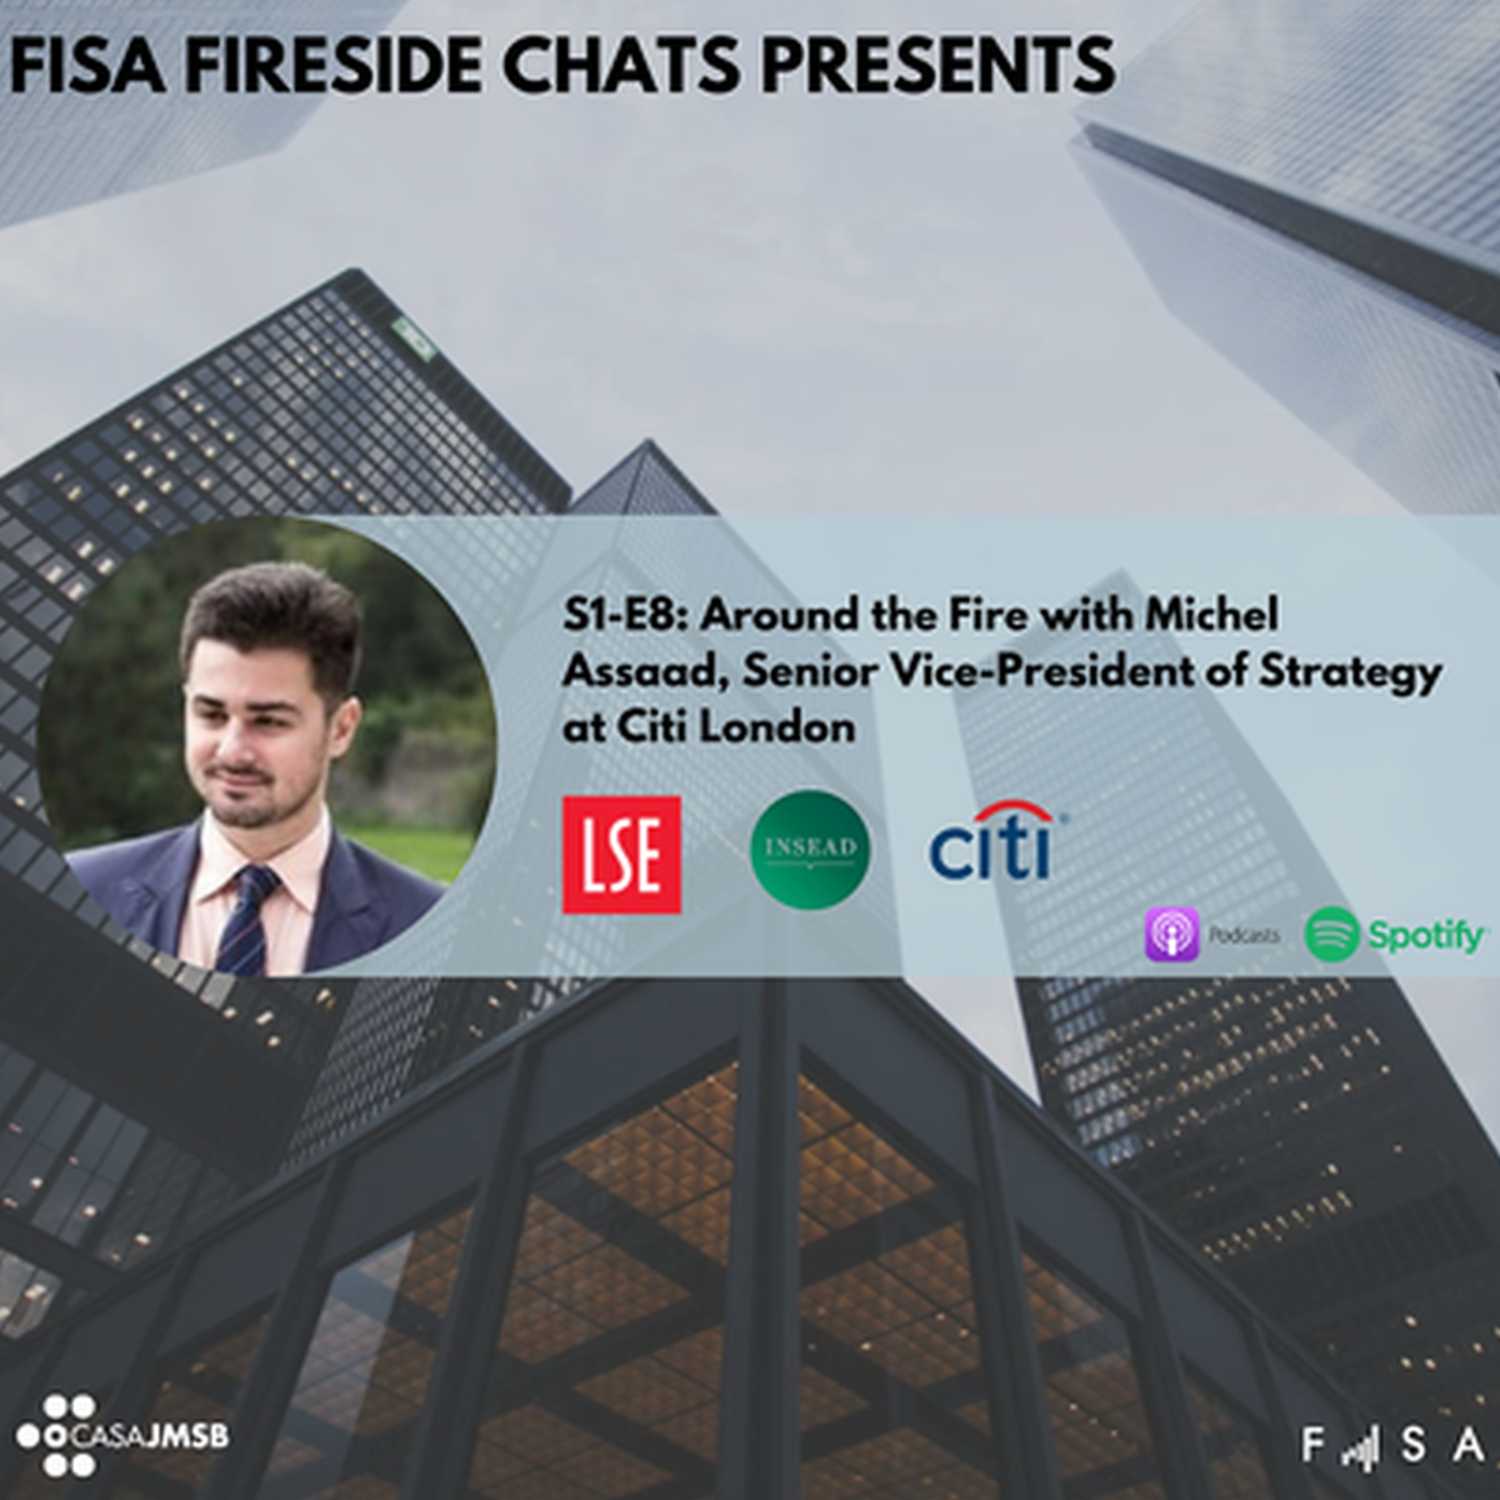 Around the Fire with Michel Assaad, Senior Vice-President of Strategy at Citi London